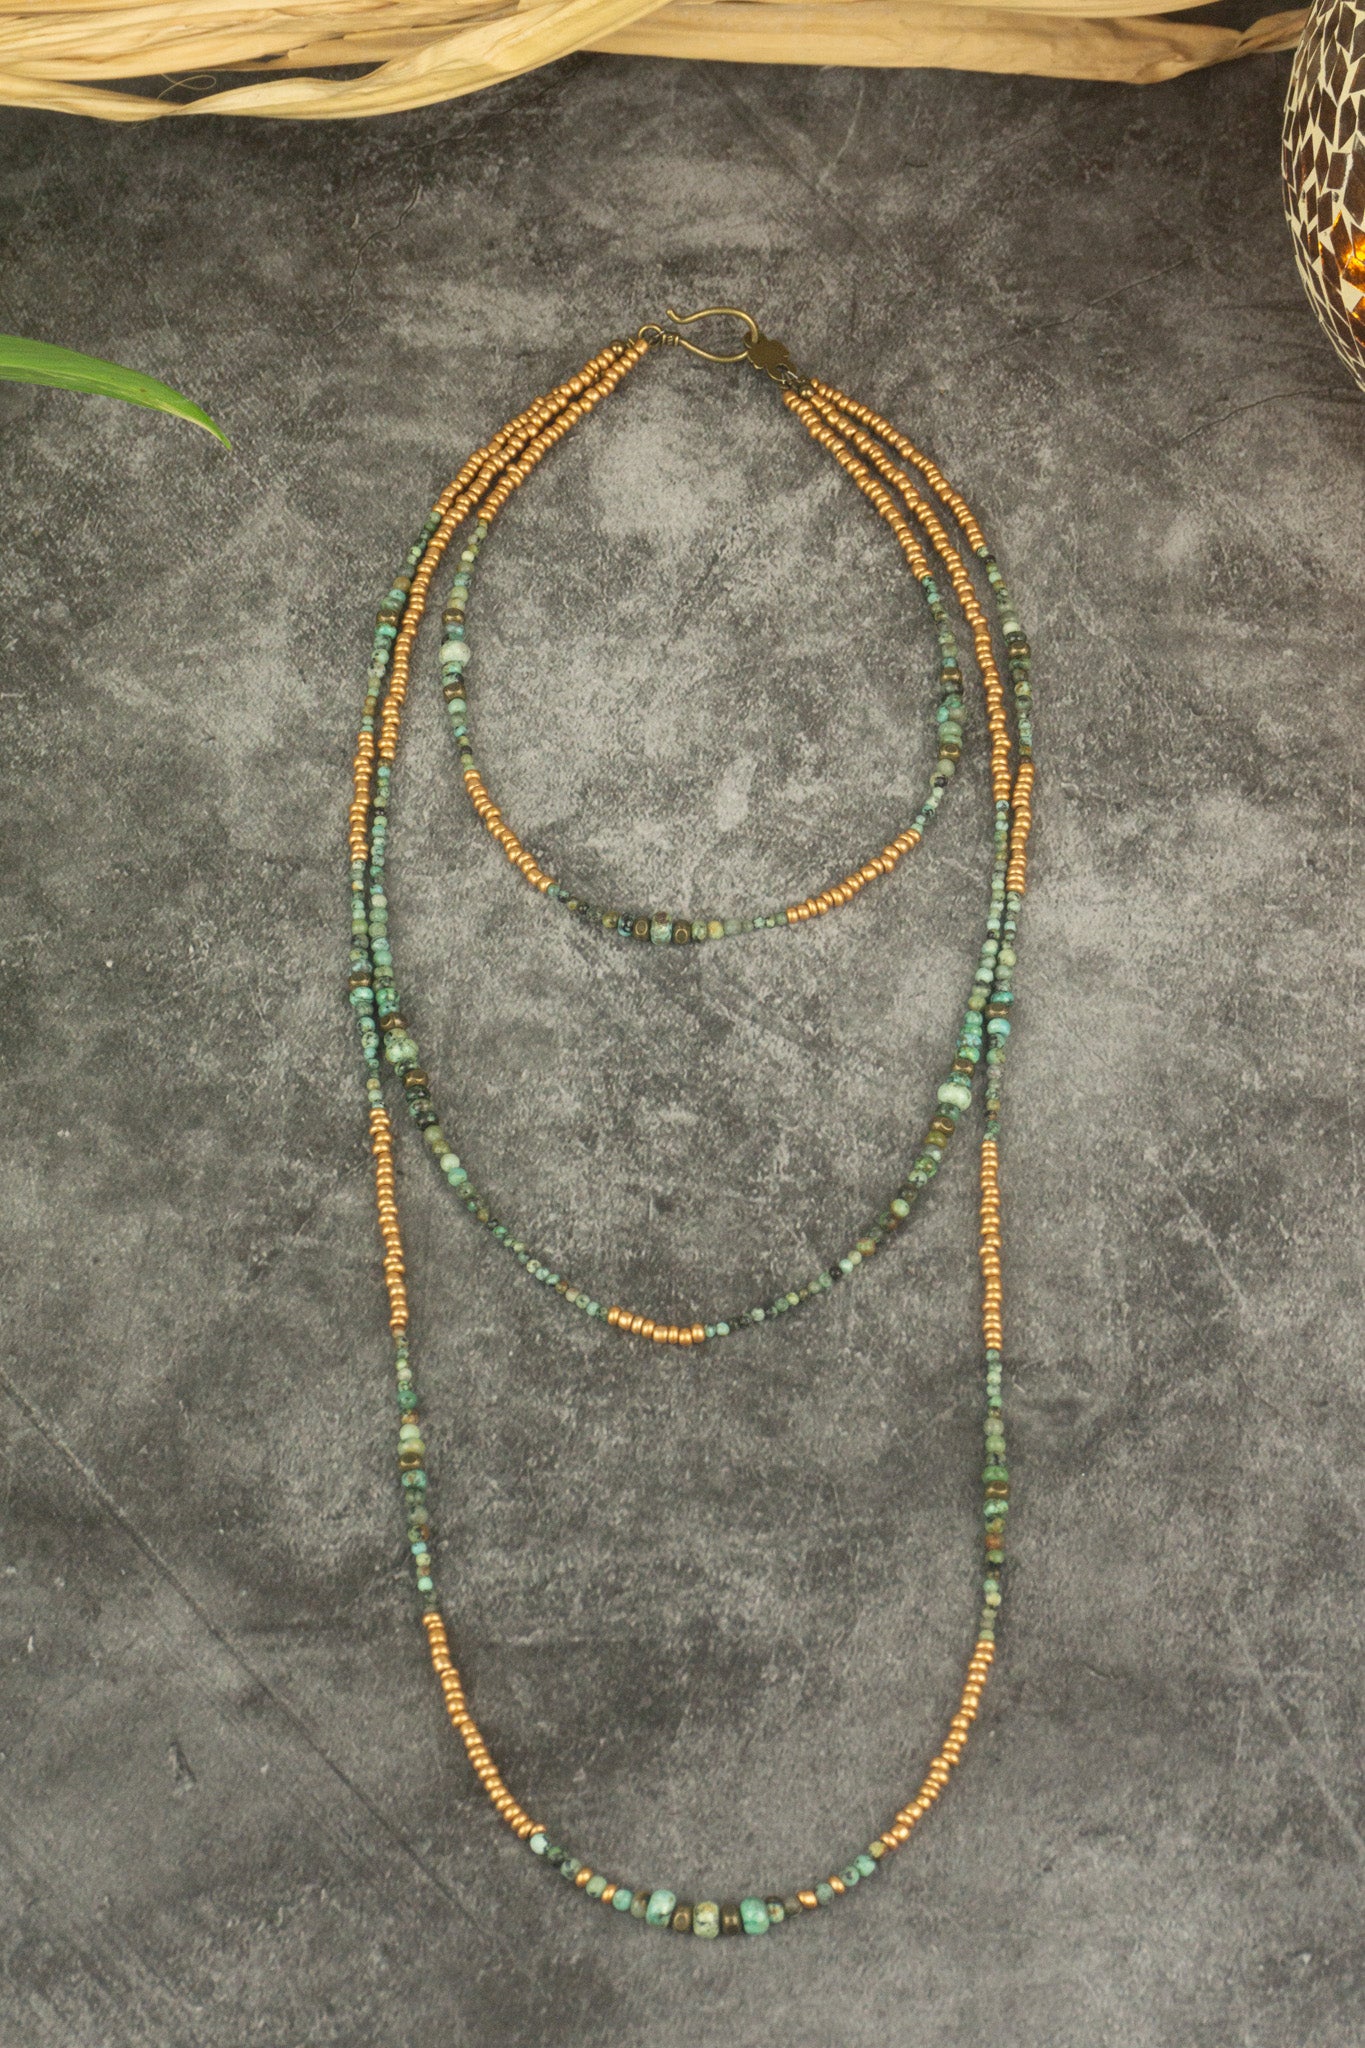 boho chic 3 layers necklace with african turquoise gemstones and antique golden beads- wander jewellery